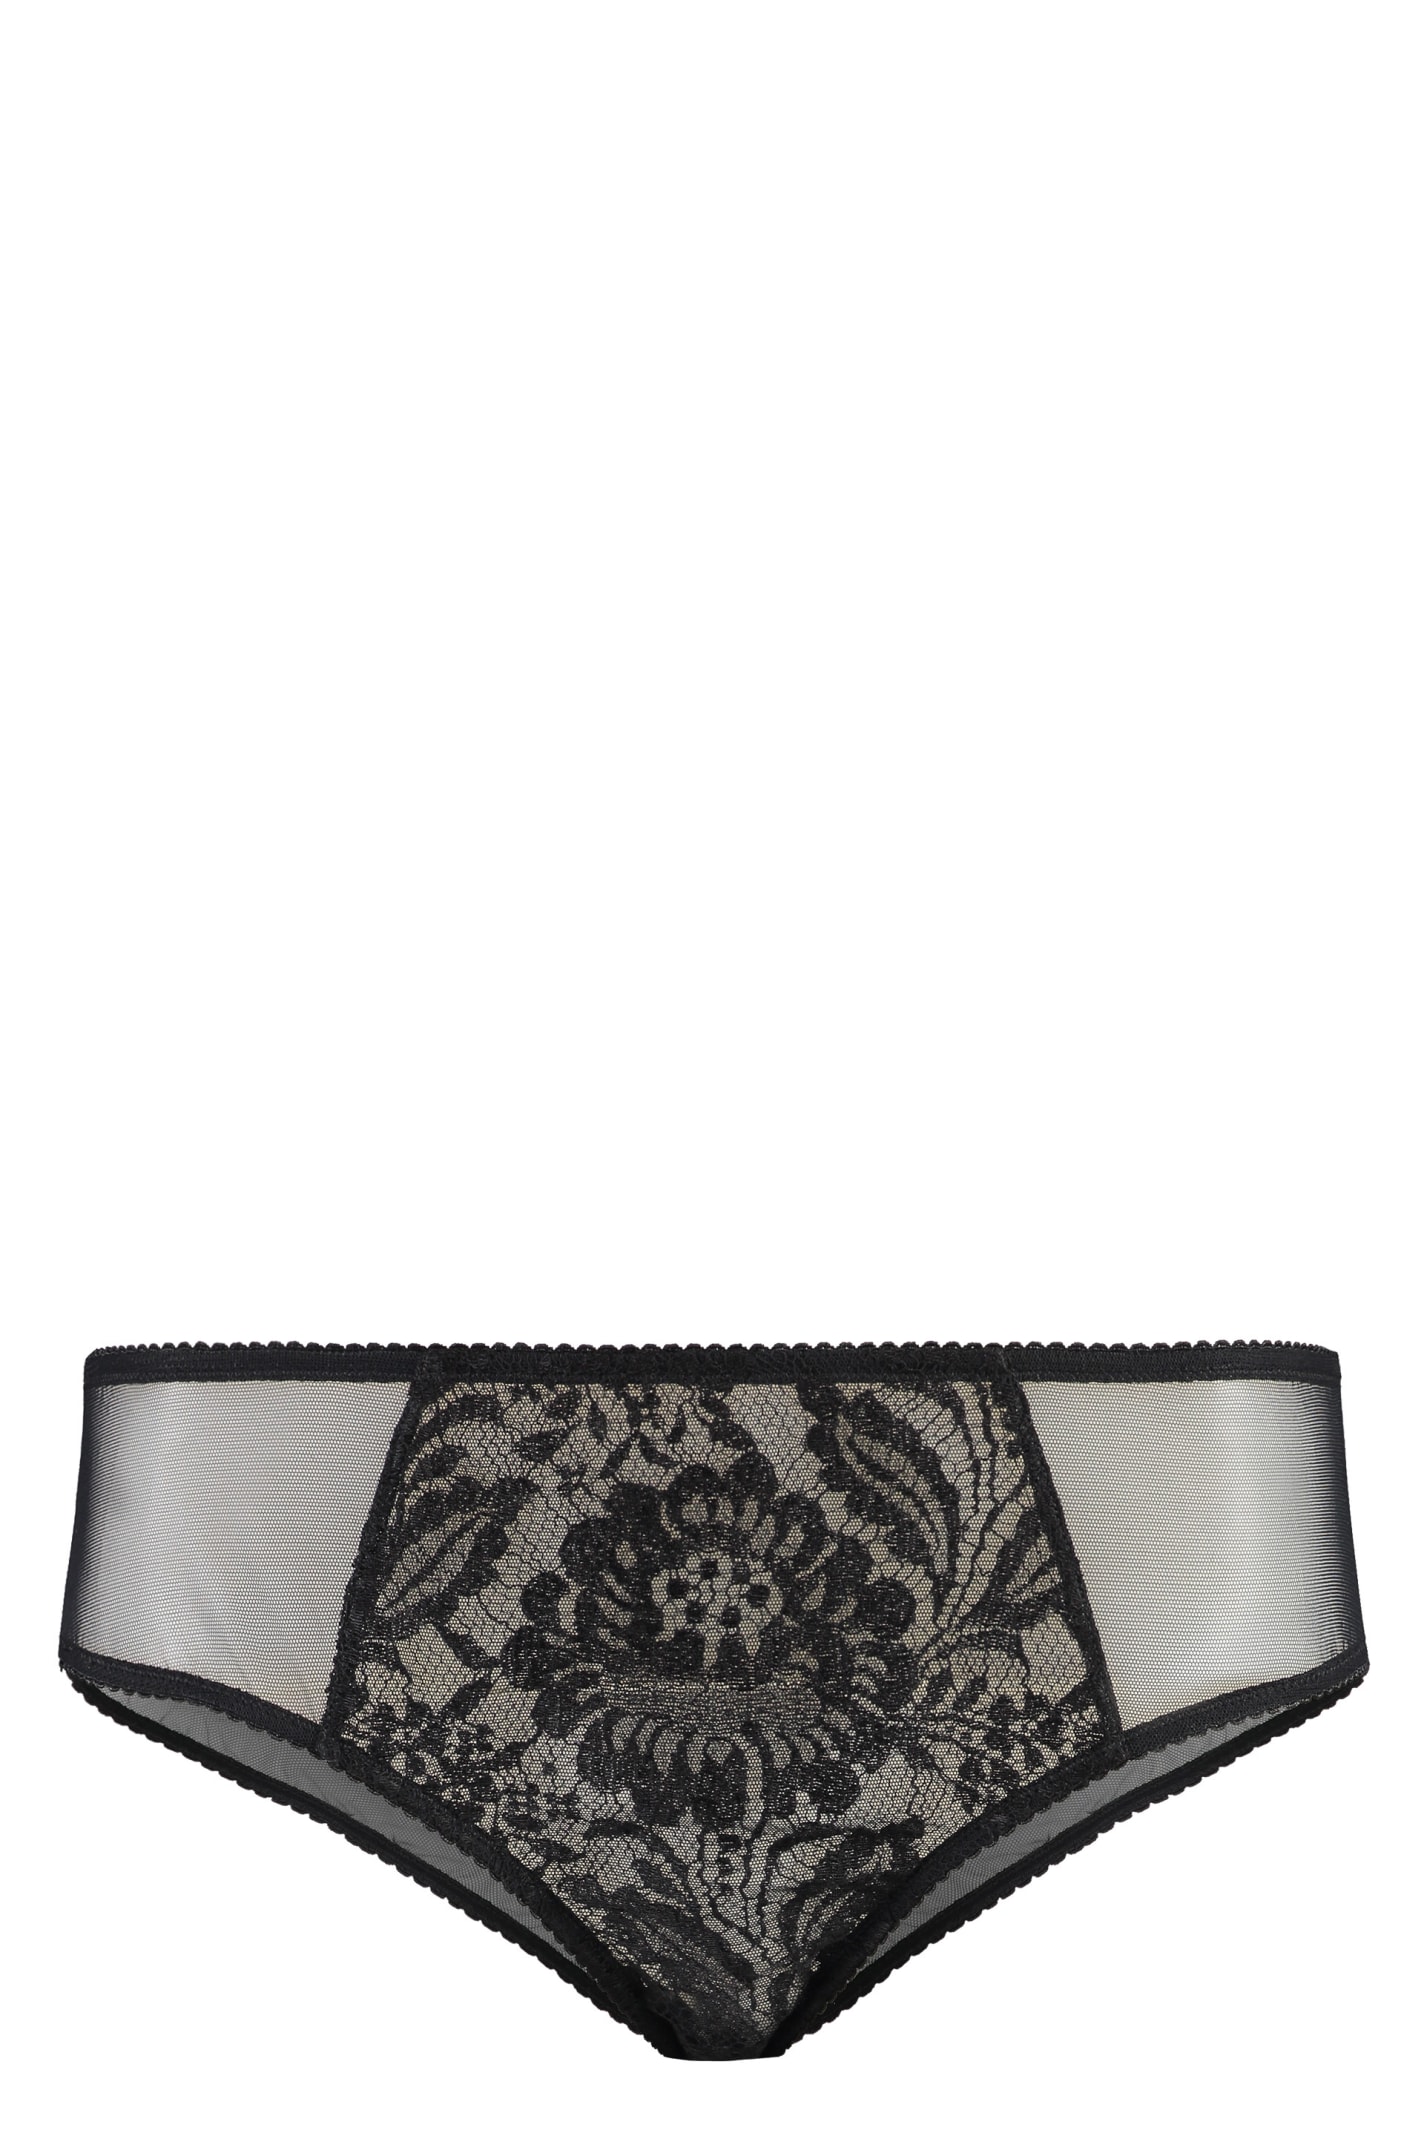 DOLCE & GABBANA LACE AND TULLE PANTIES